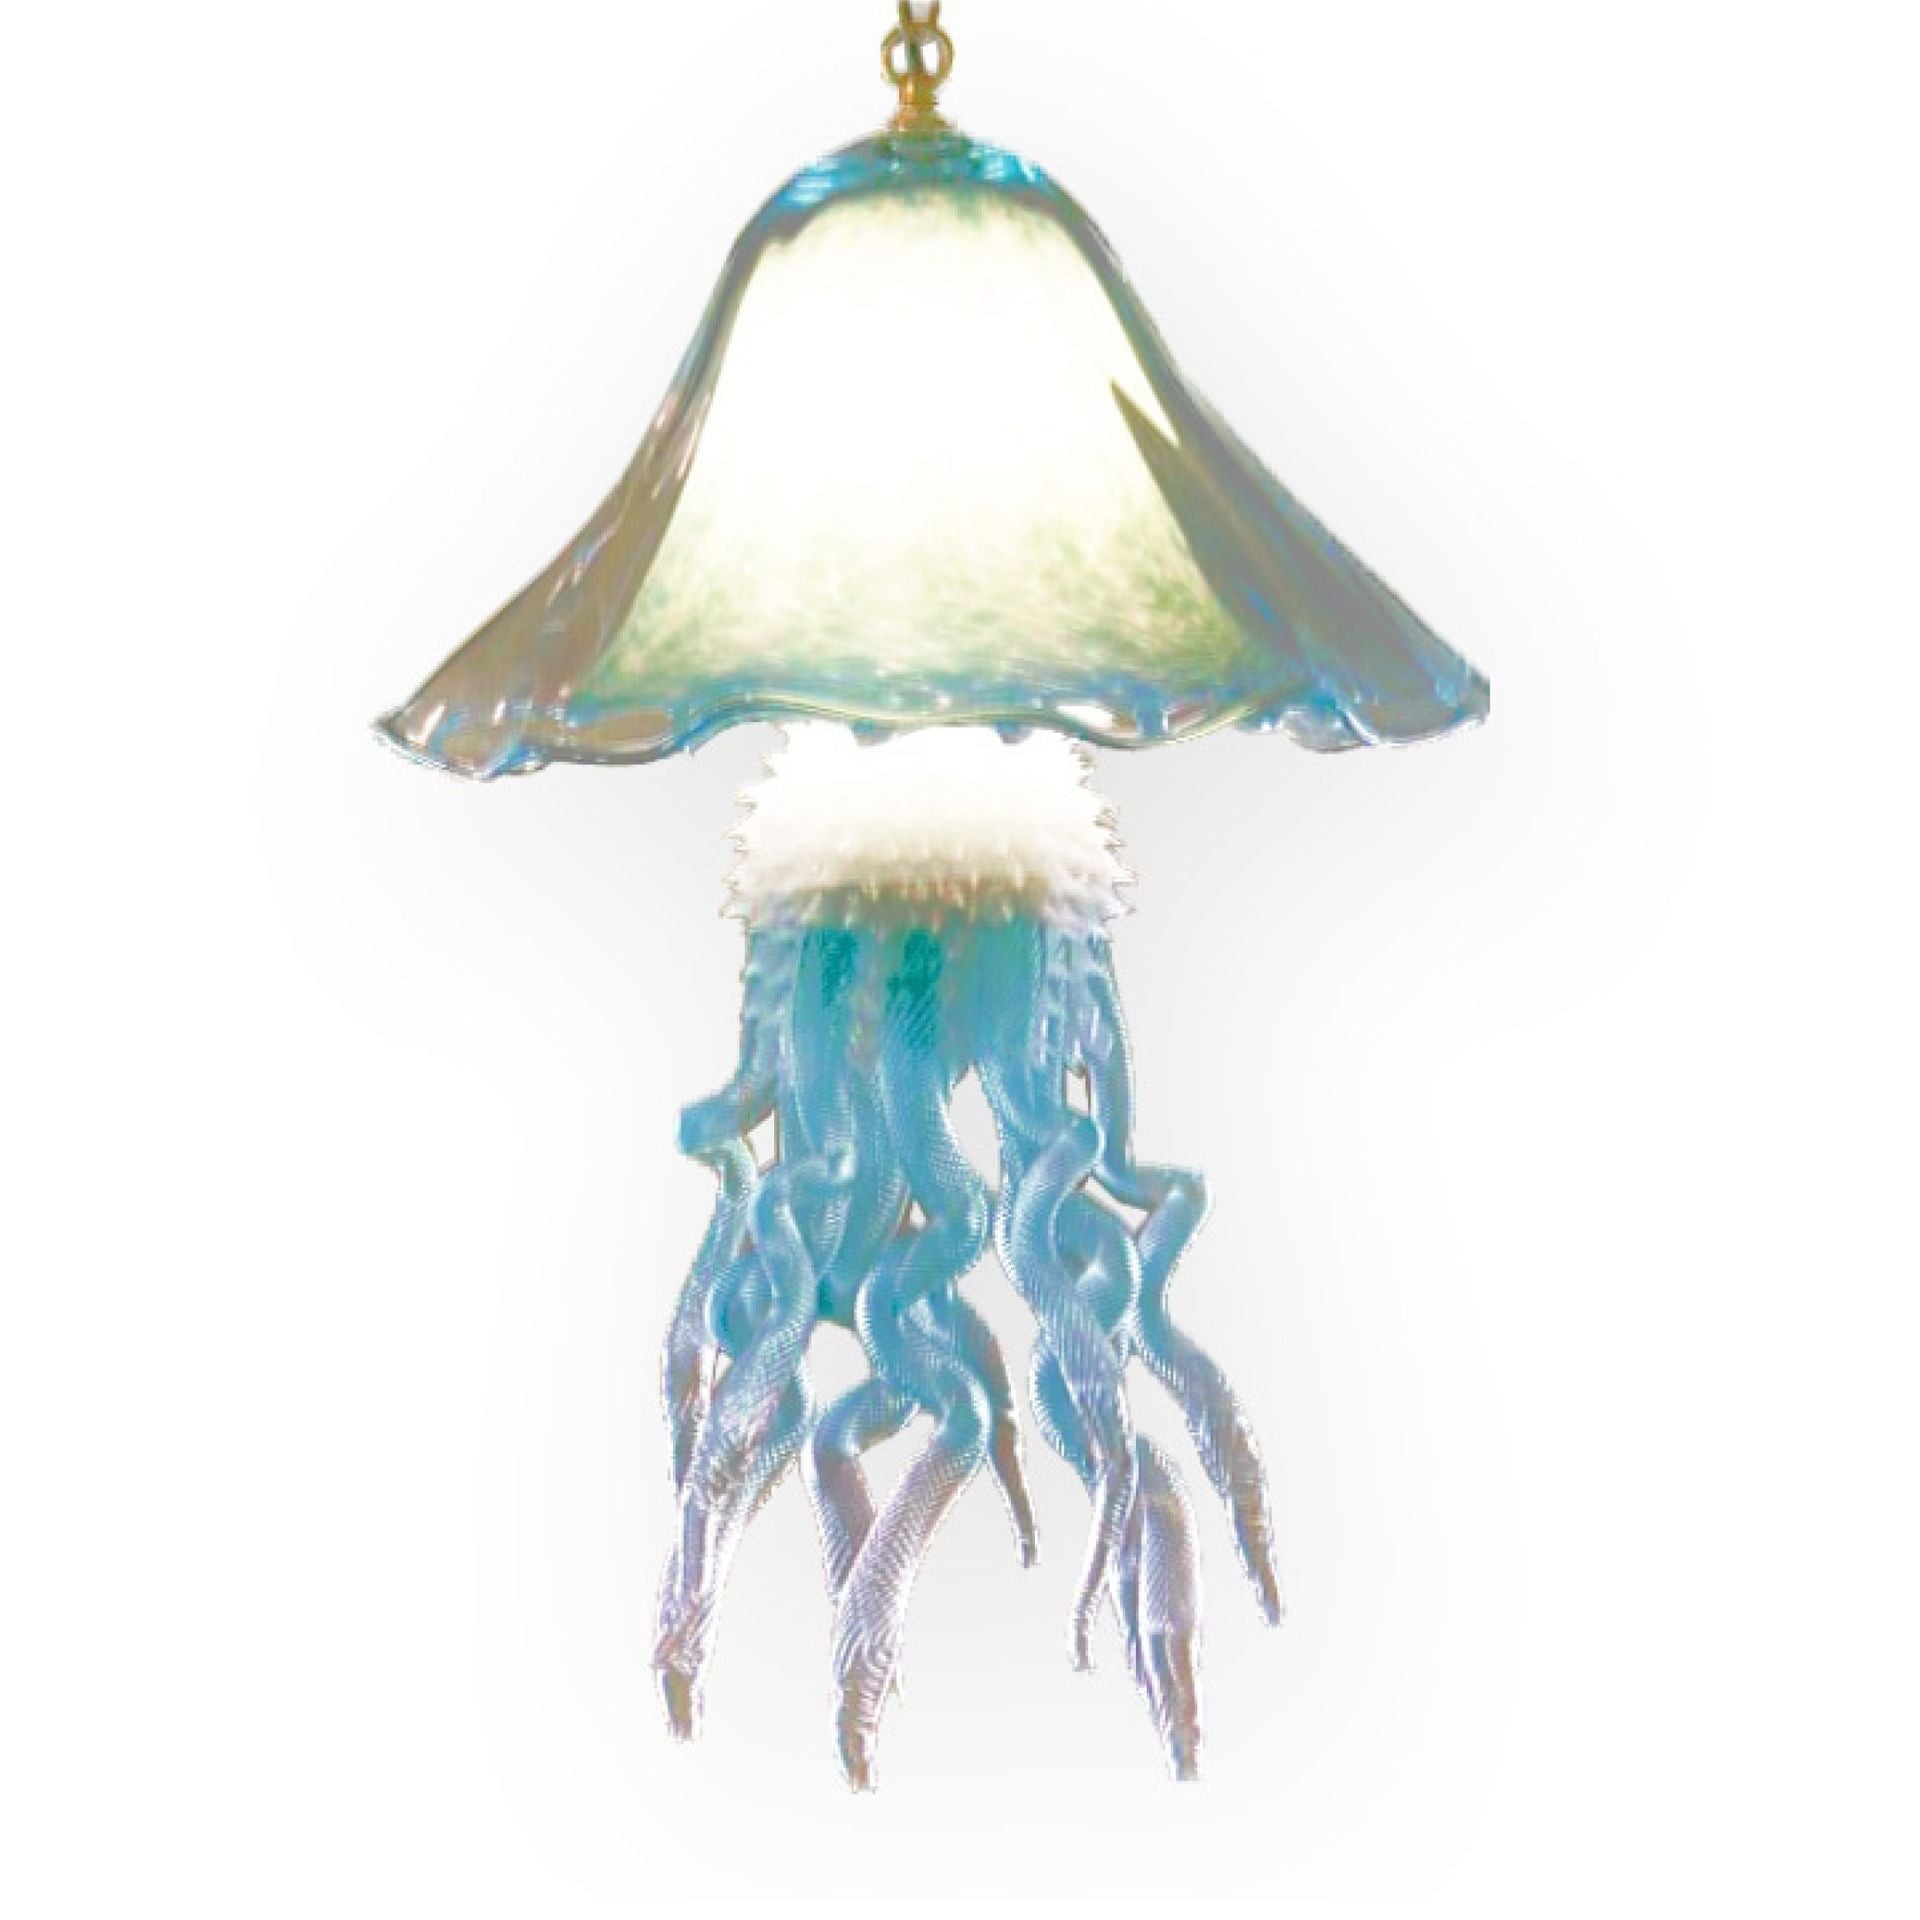 Jellyfish Chandelier Double in Teal USA Blown Glass - Eclectic Treasures